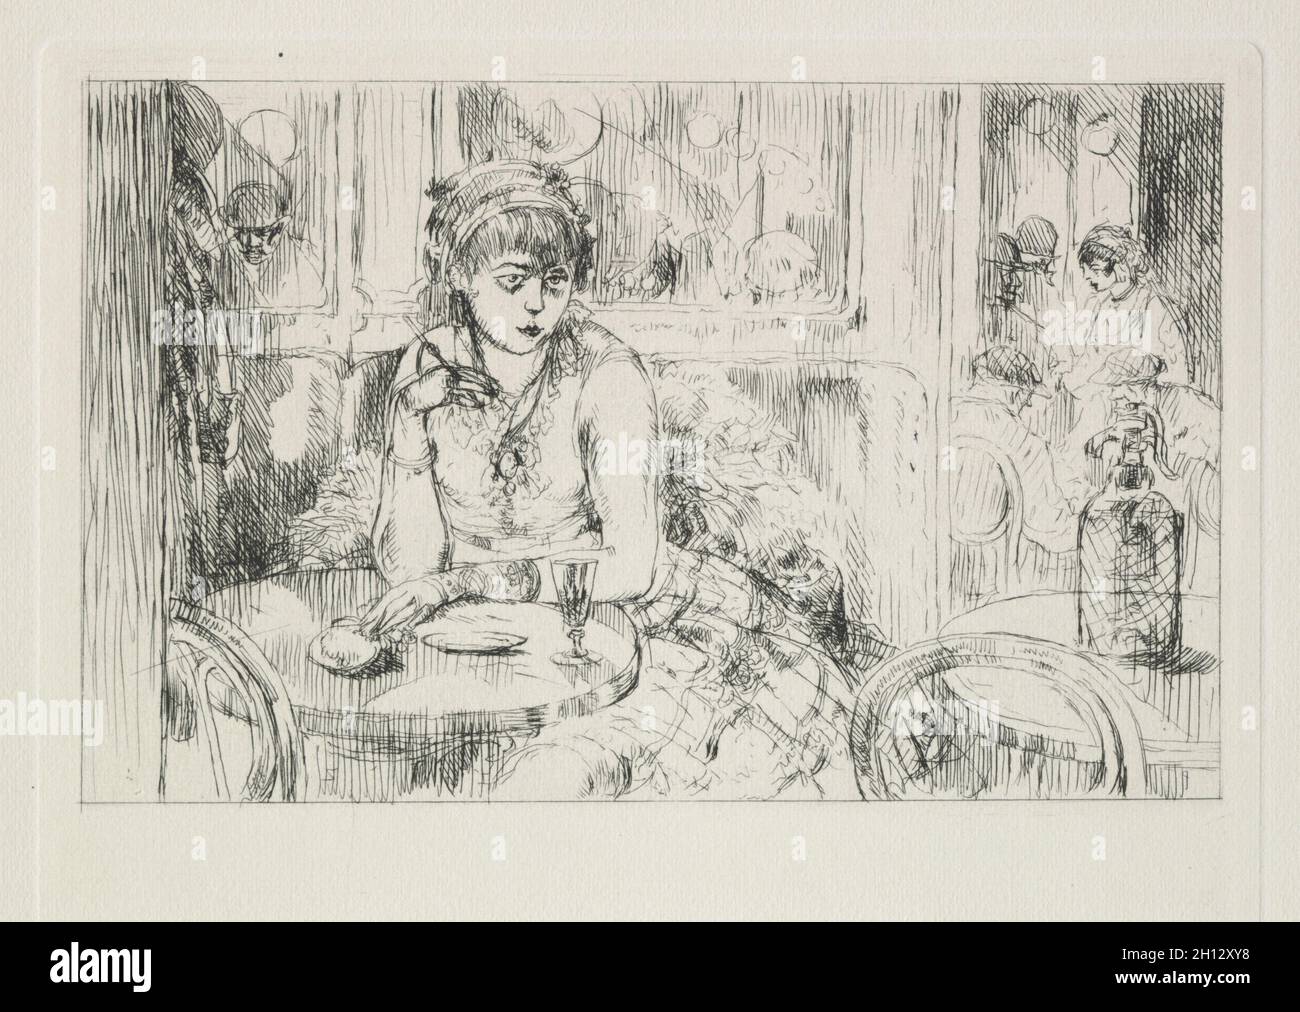 Le Drageoir aux épices by J. K. Huysmans: P. 71, 1929. Auguste Brouet (French, 1872-1941), J.K. Huysmans (French). Book containing 54 etchings; overall: 28.7 x 23.3 x 4.5 cm (11 5/16 x 9 3/16 x 1 3/4 in.). Stock Photo